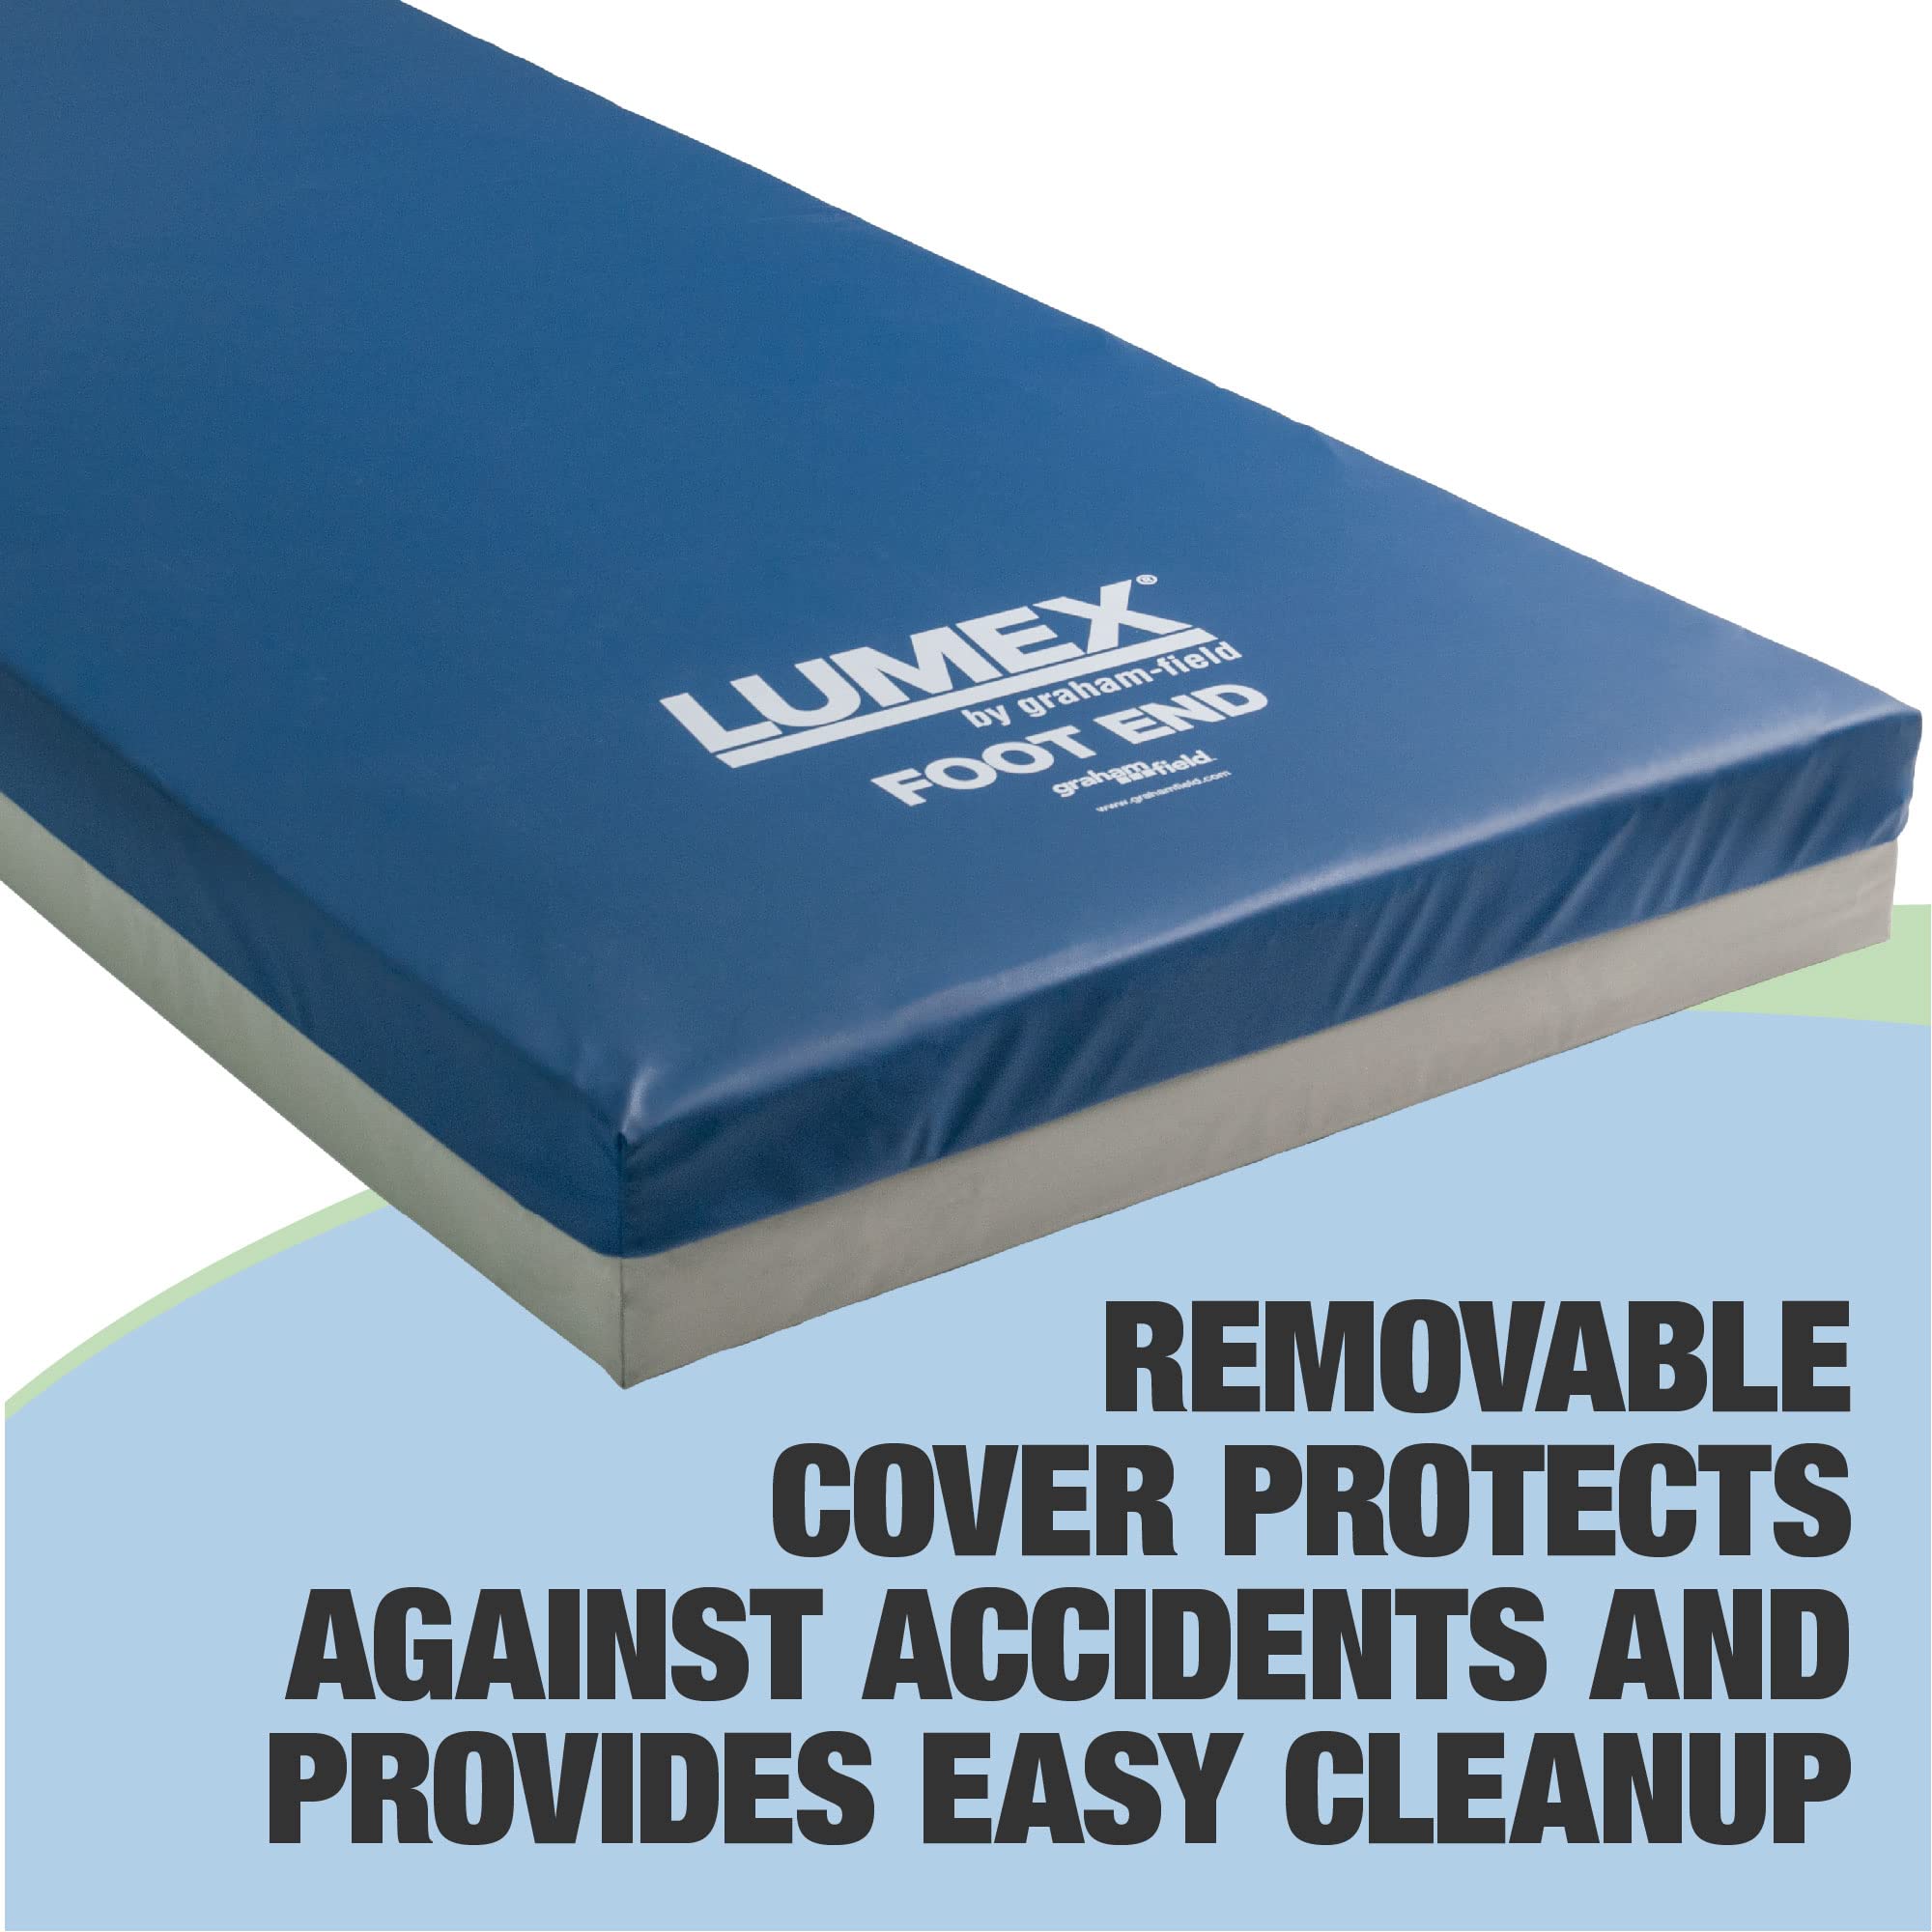 Lumex Select Hospital Bed Mattress, Multi-Layer Foam, Fluid-Resistant Cover, Twin XL, 35 x 80 Inches